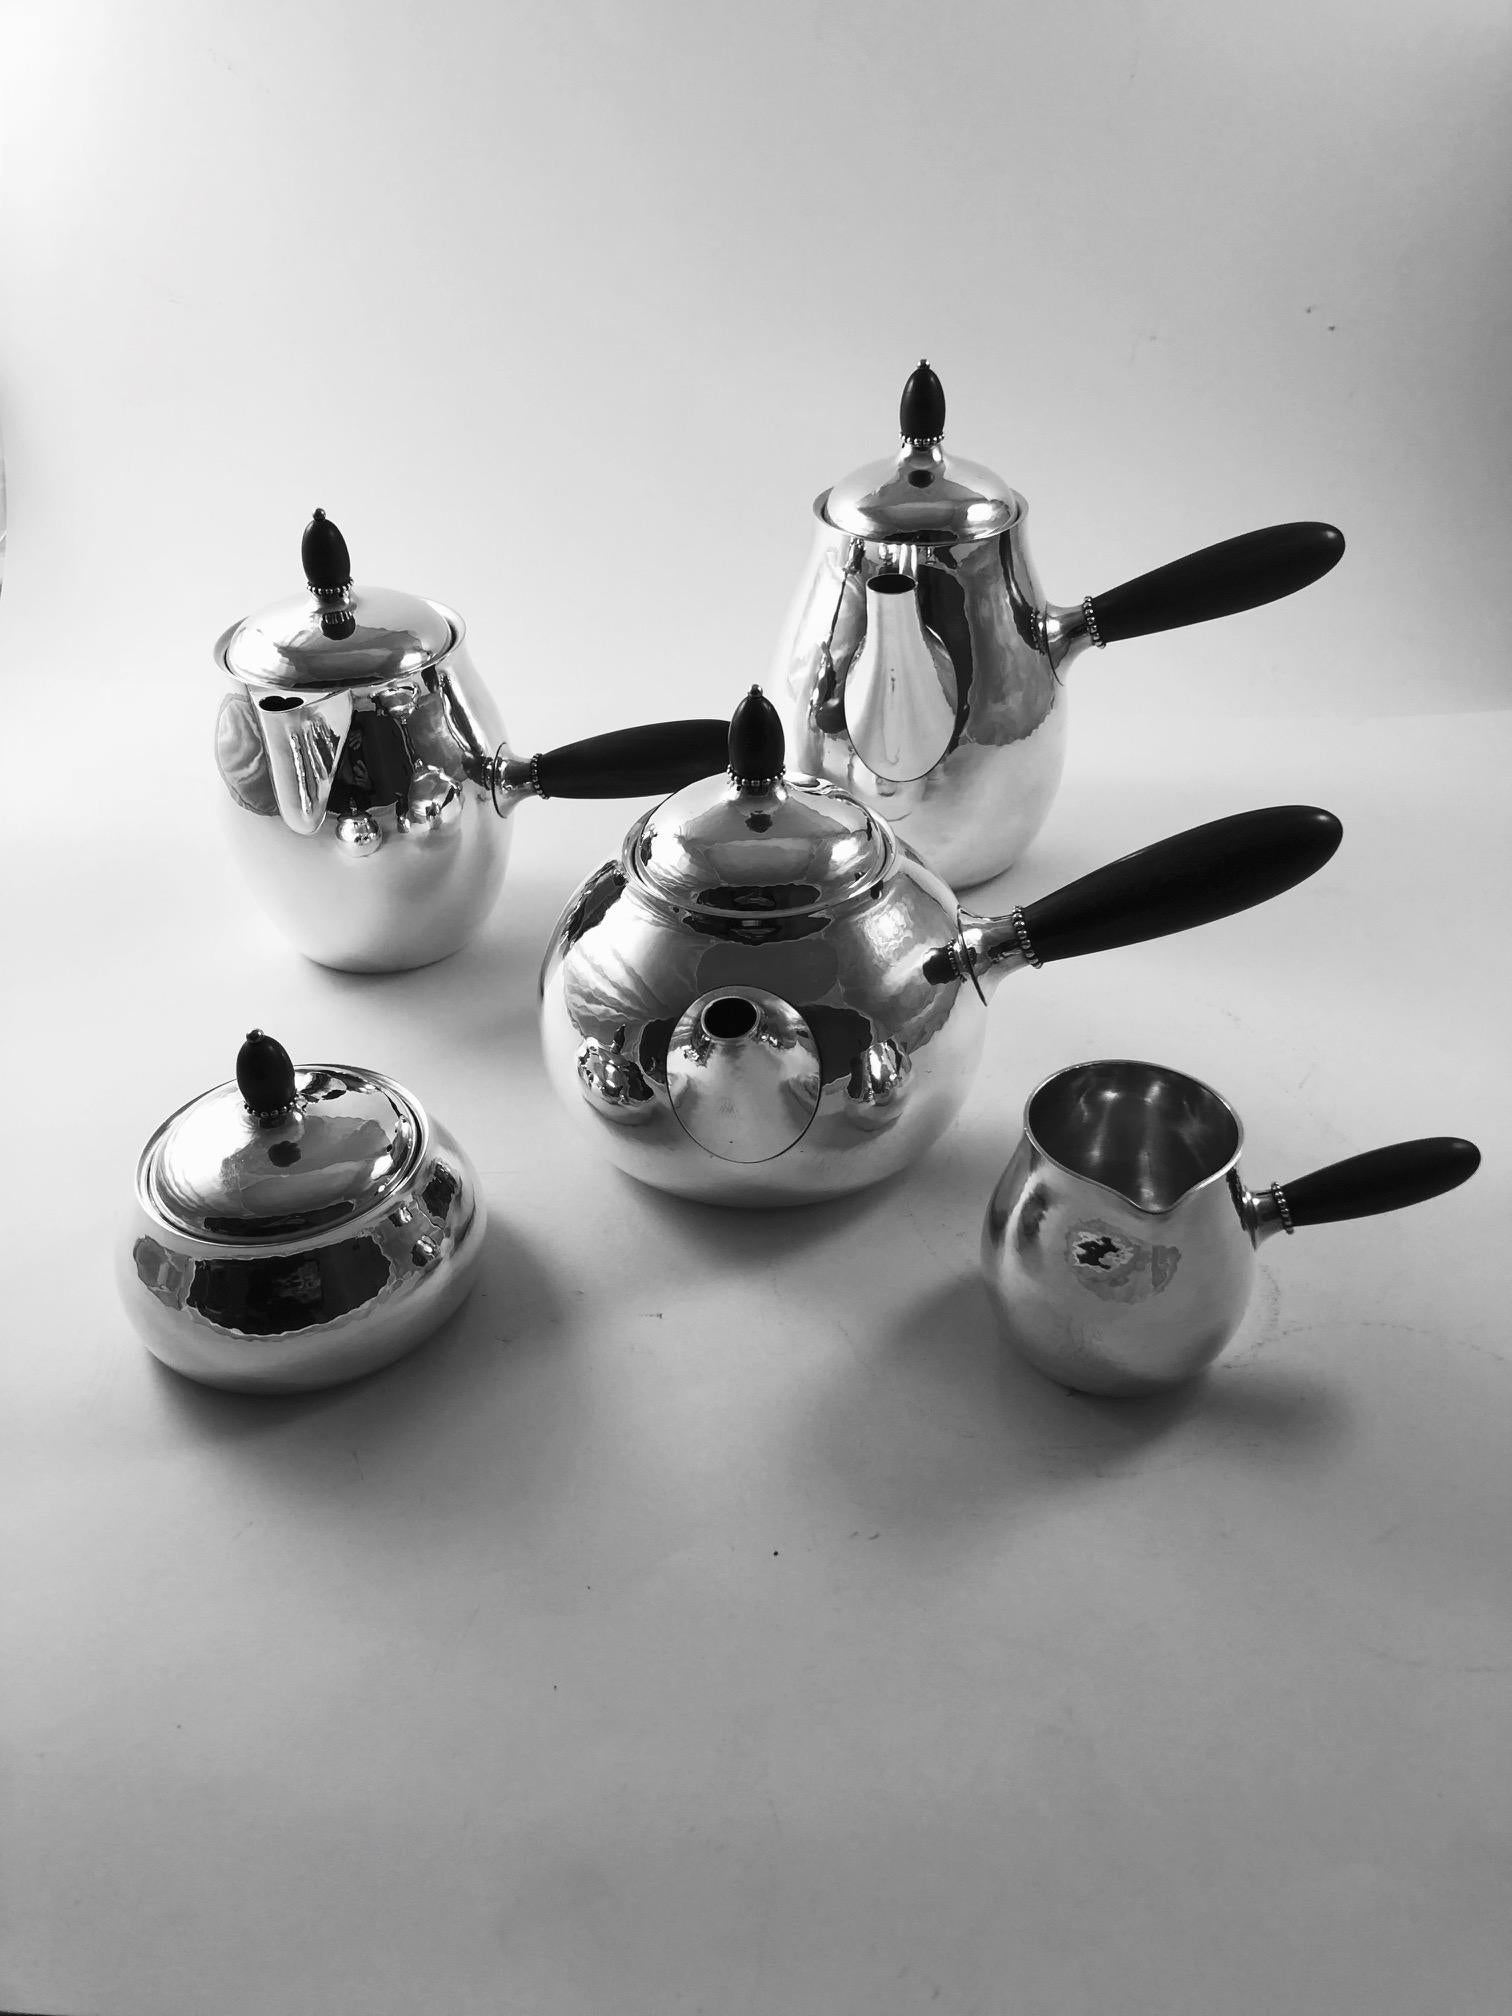 Offered at a very reasonable holiday price, a five piece Georg Jensen tea and coffee service with ebony handles.
Design #80 by Georg Jensen from circa 1906. The set is –

#80A coffee pot, 6 3/4? (17cm) in height
#80A teapot, 5 1/8